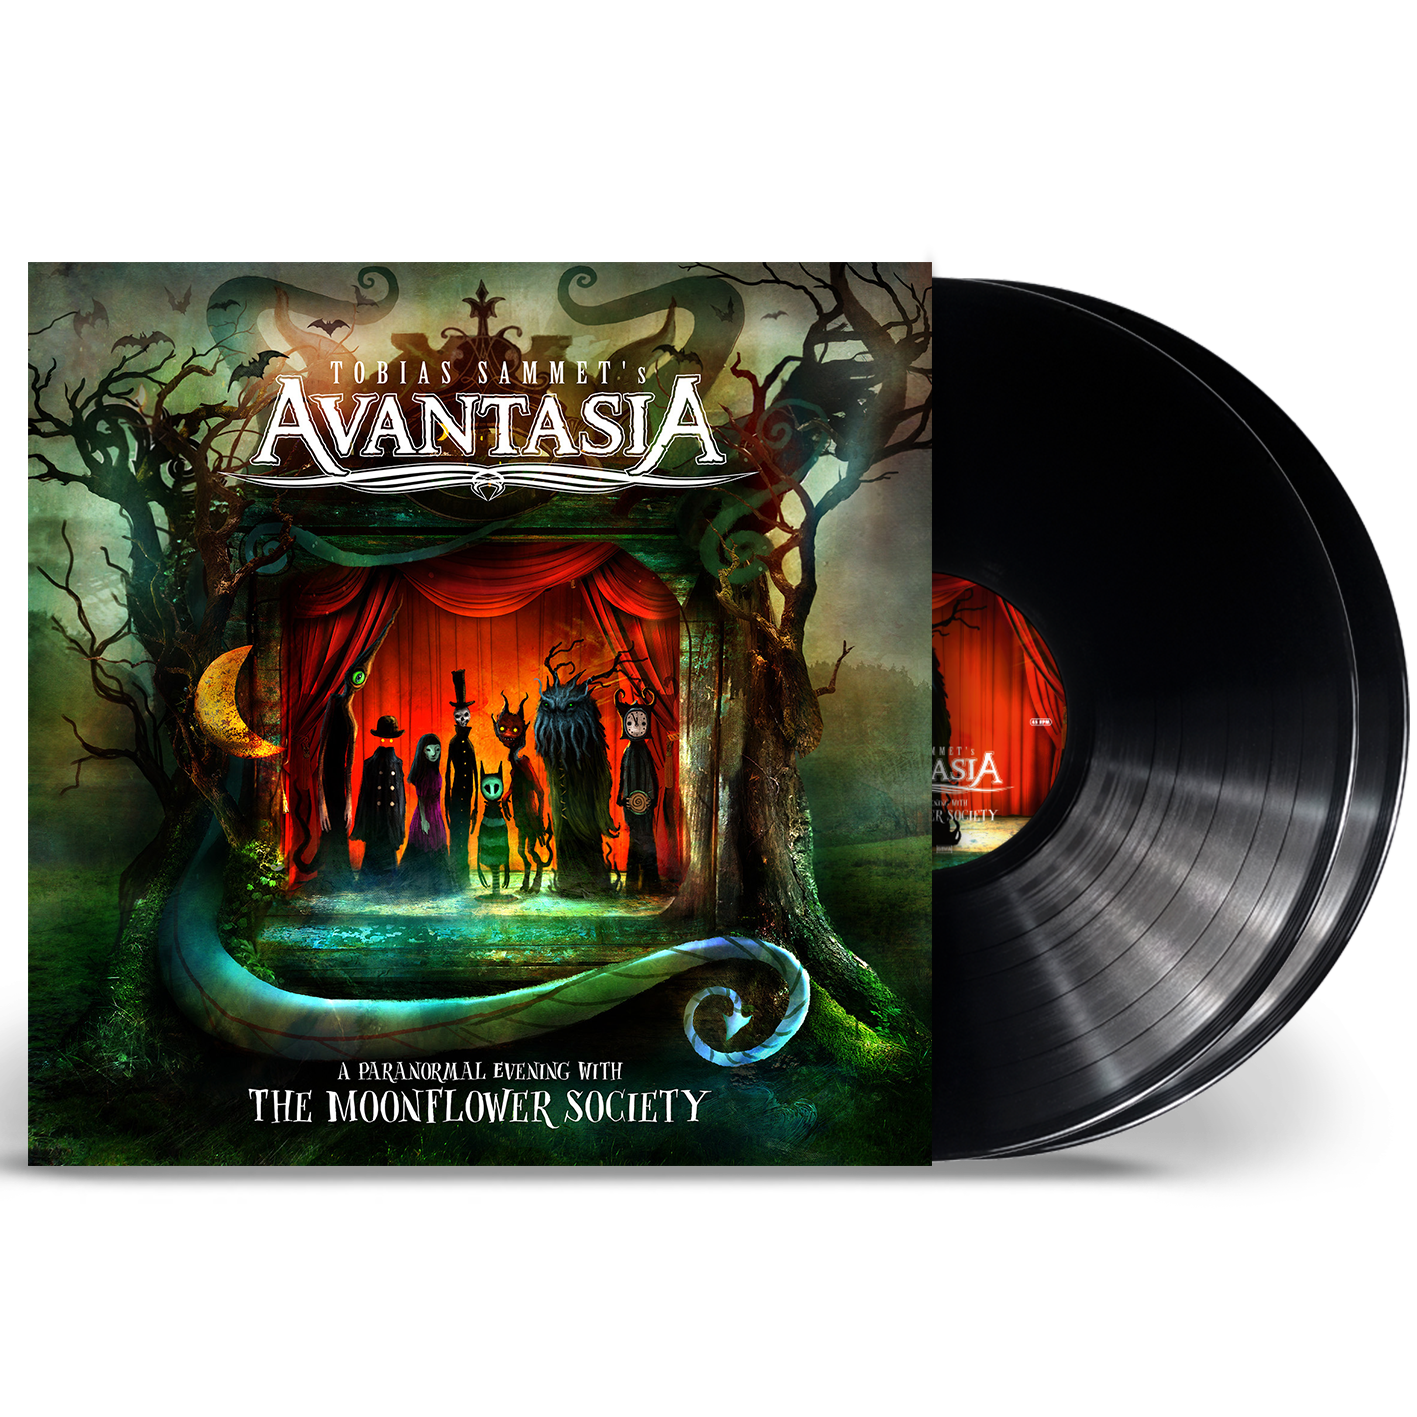 A Paranormal Evening With The Moonflower Society: Limited Edition Vinyl 2LP